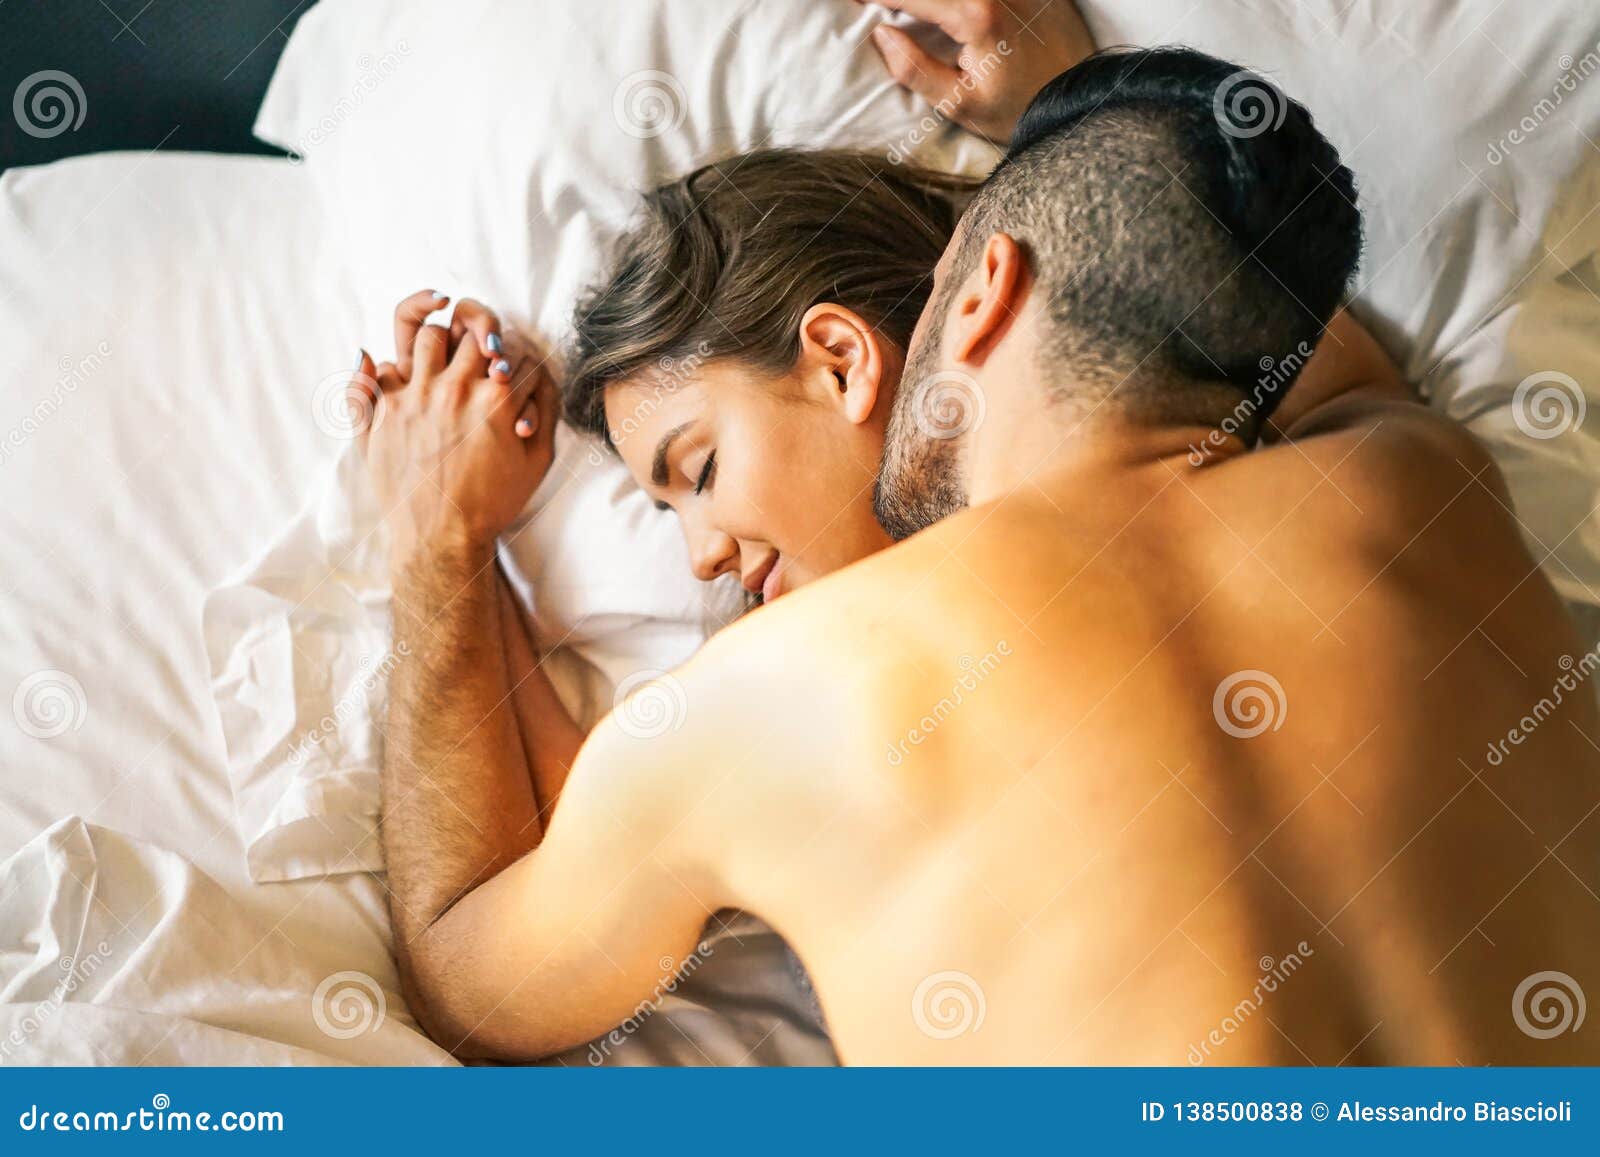 Passionate Young Couple Having Sex on the Bed at Home - Intimate and Sensual Moments of a Couple Making Love in the Bedroom Stock Photo image